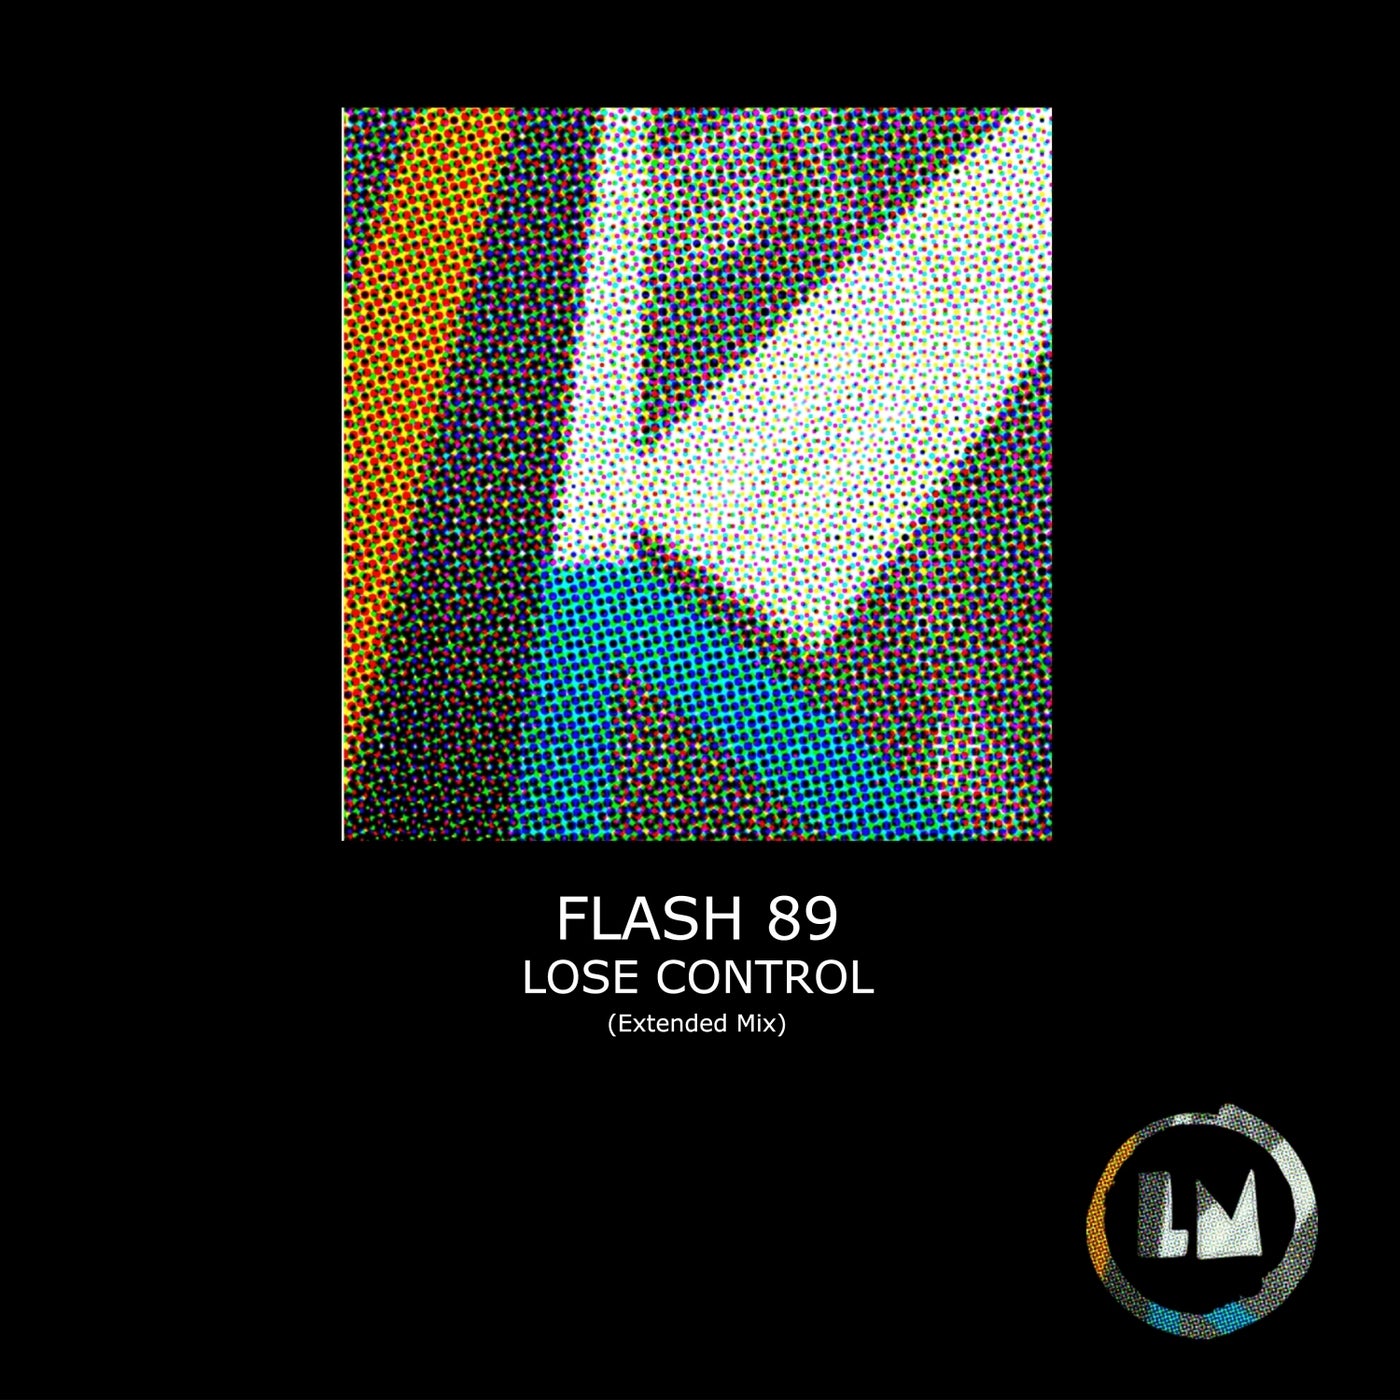 Flash 89 – Lose Control (Extended Mix) [LPS302D]